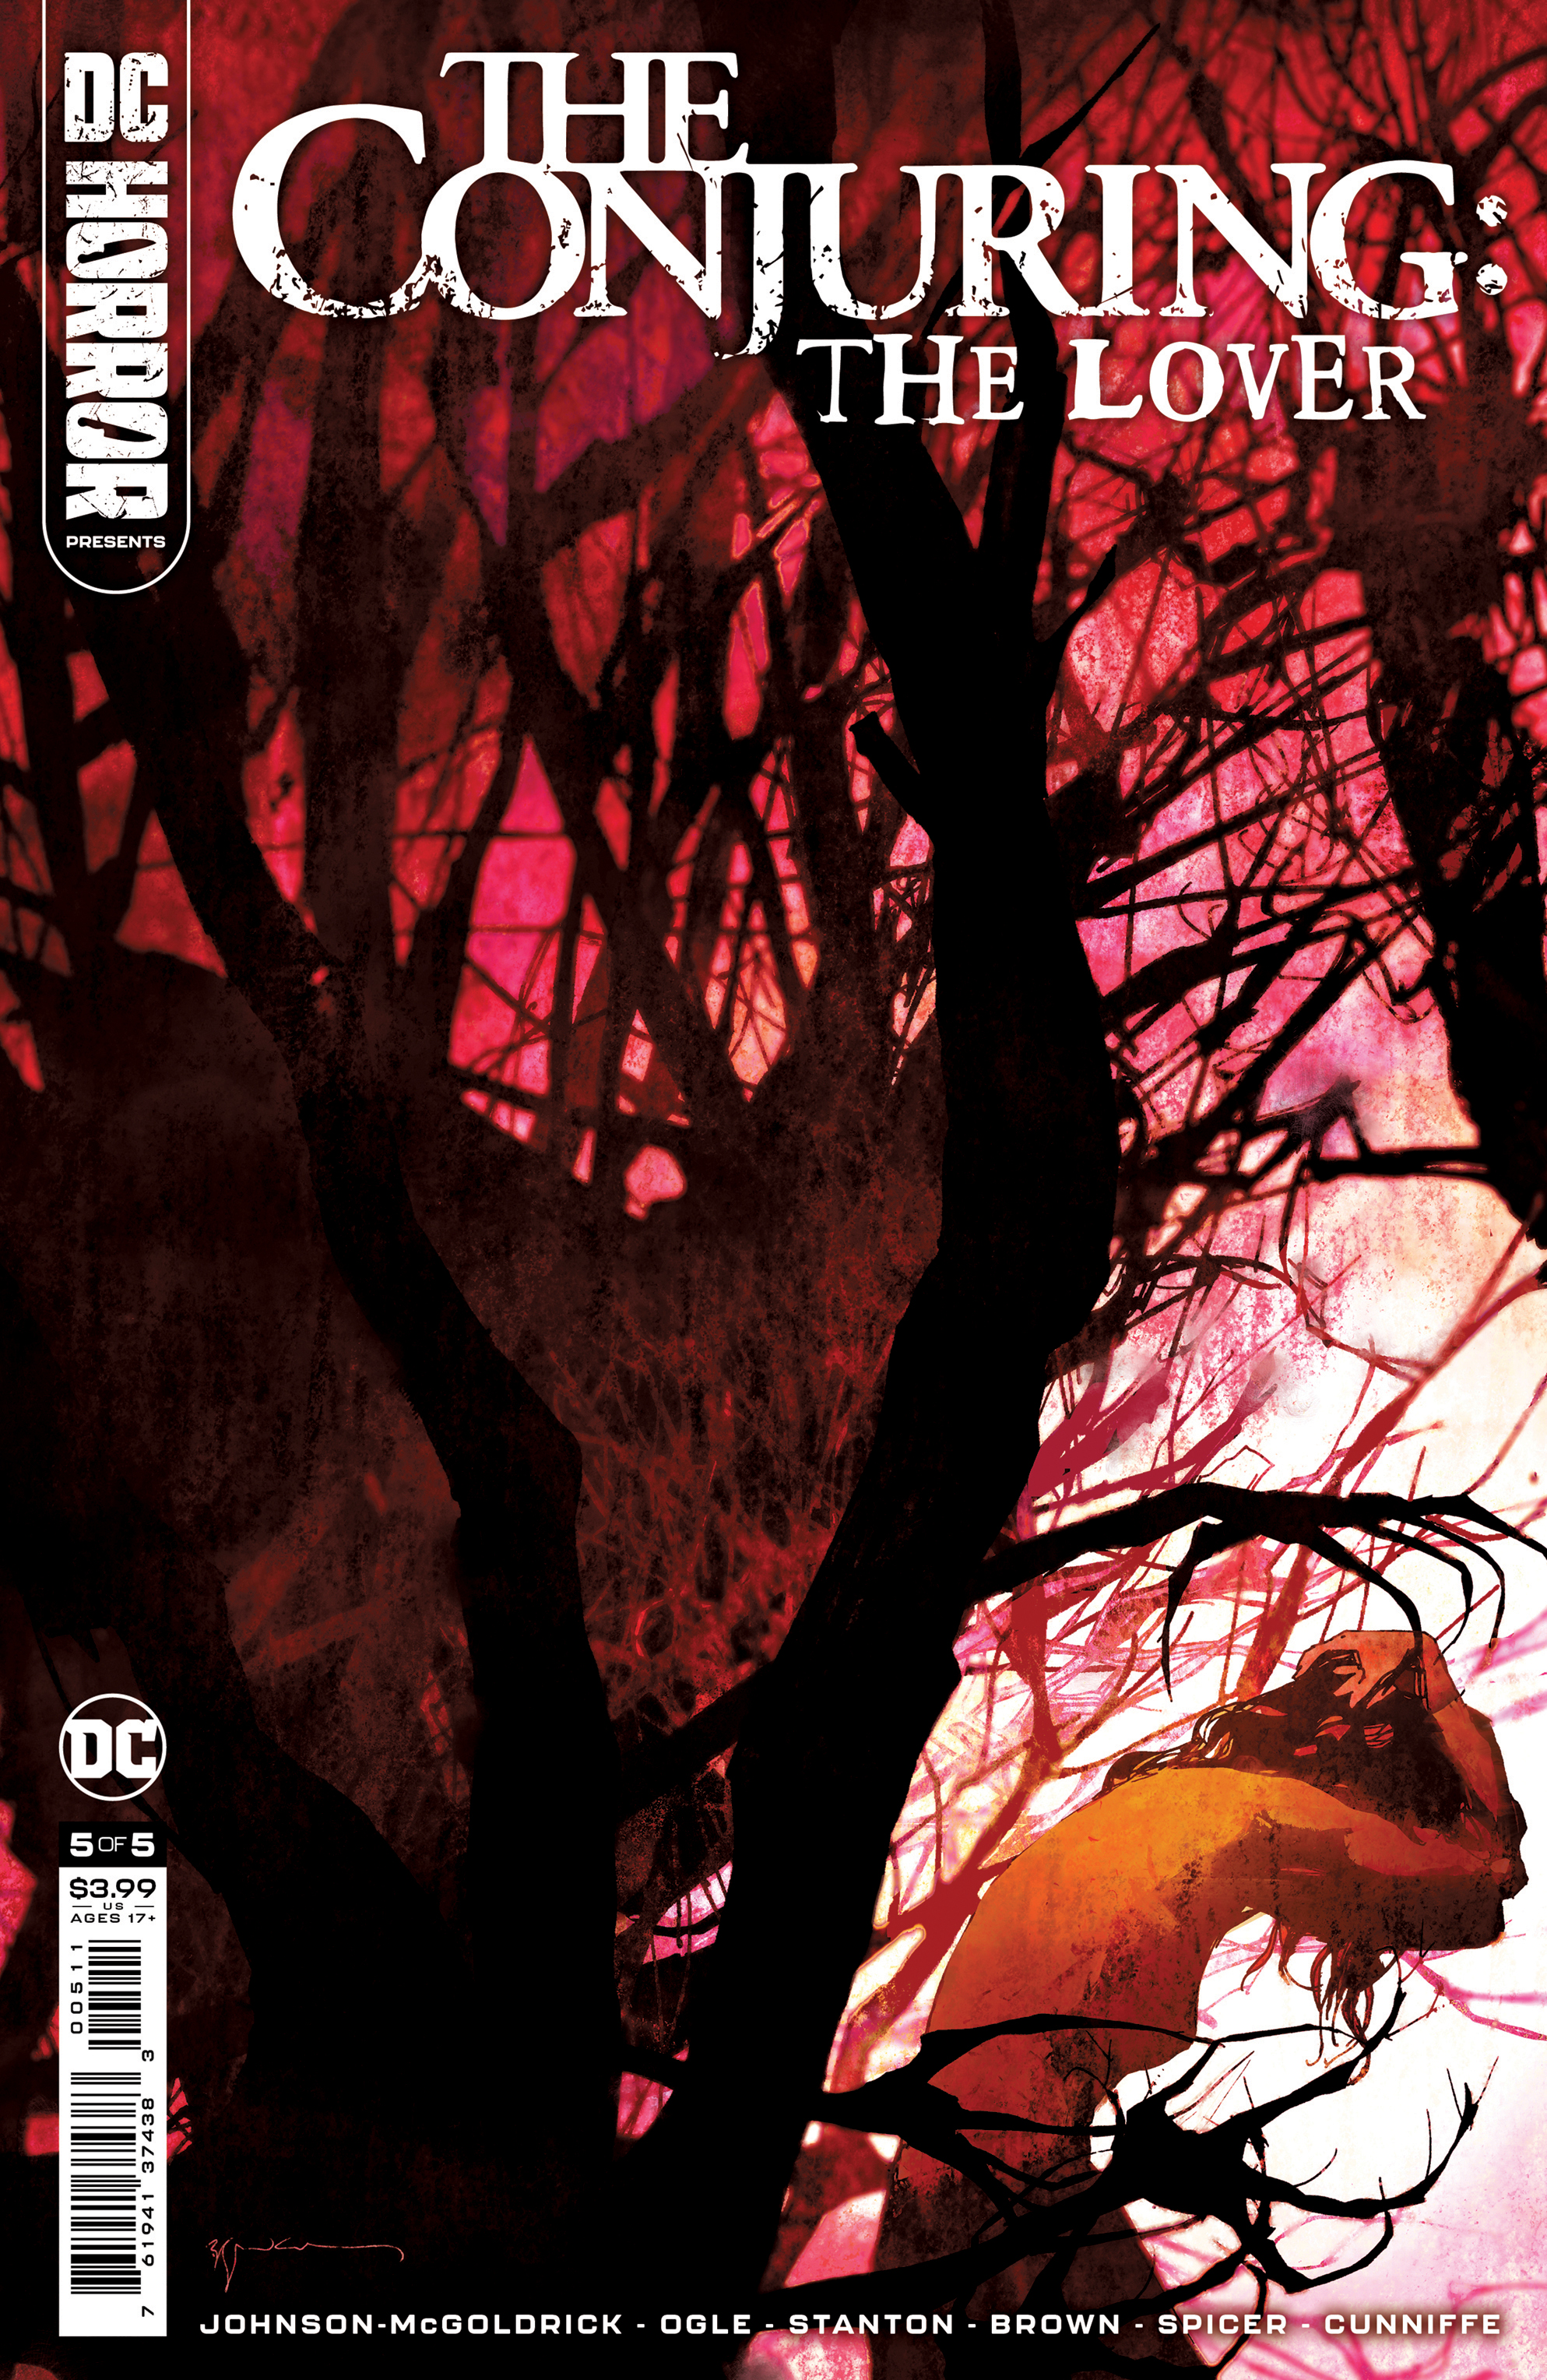 DC Horror Presents The Conjuring The Lover #5 Cover A Bill Sienkiewicz (Mature) (Of 5)